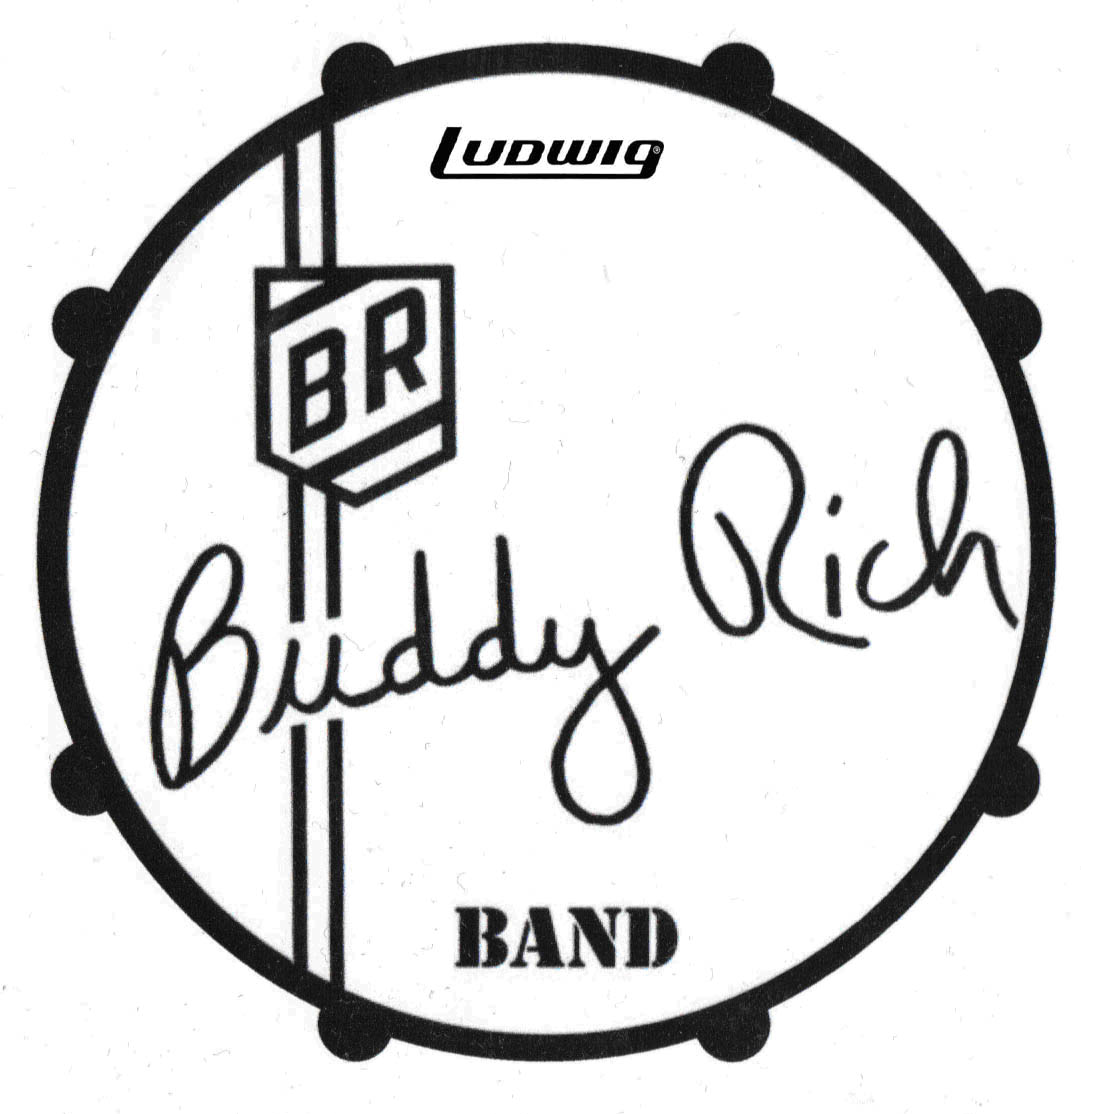 File:The Buddy Rich Band Logo.png - Wikimedia Commons